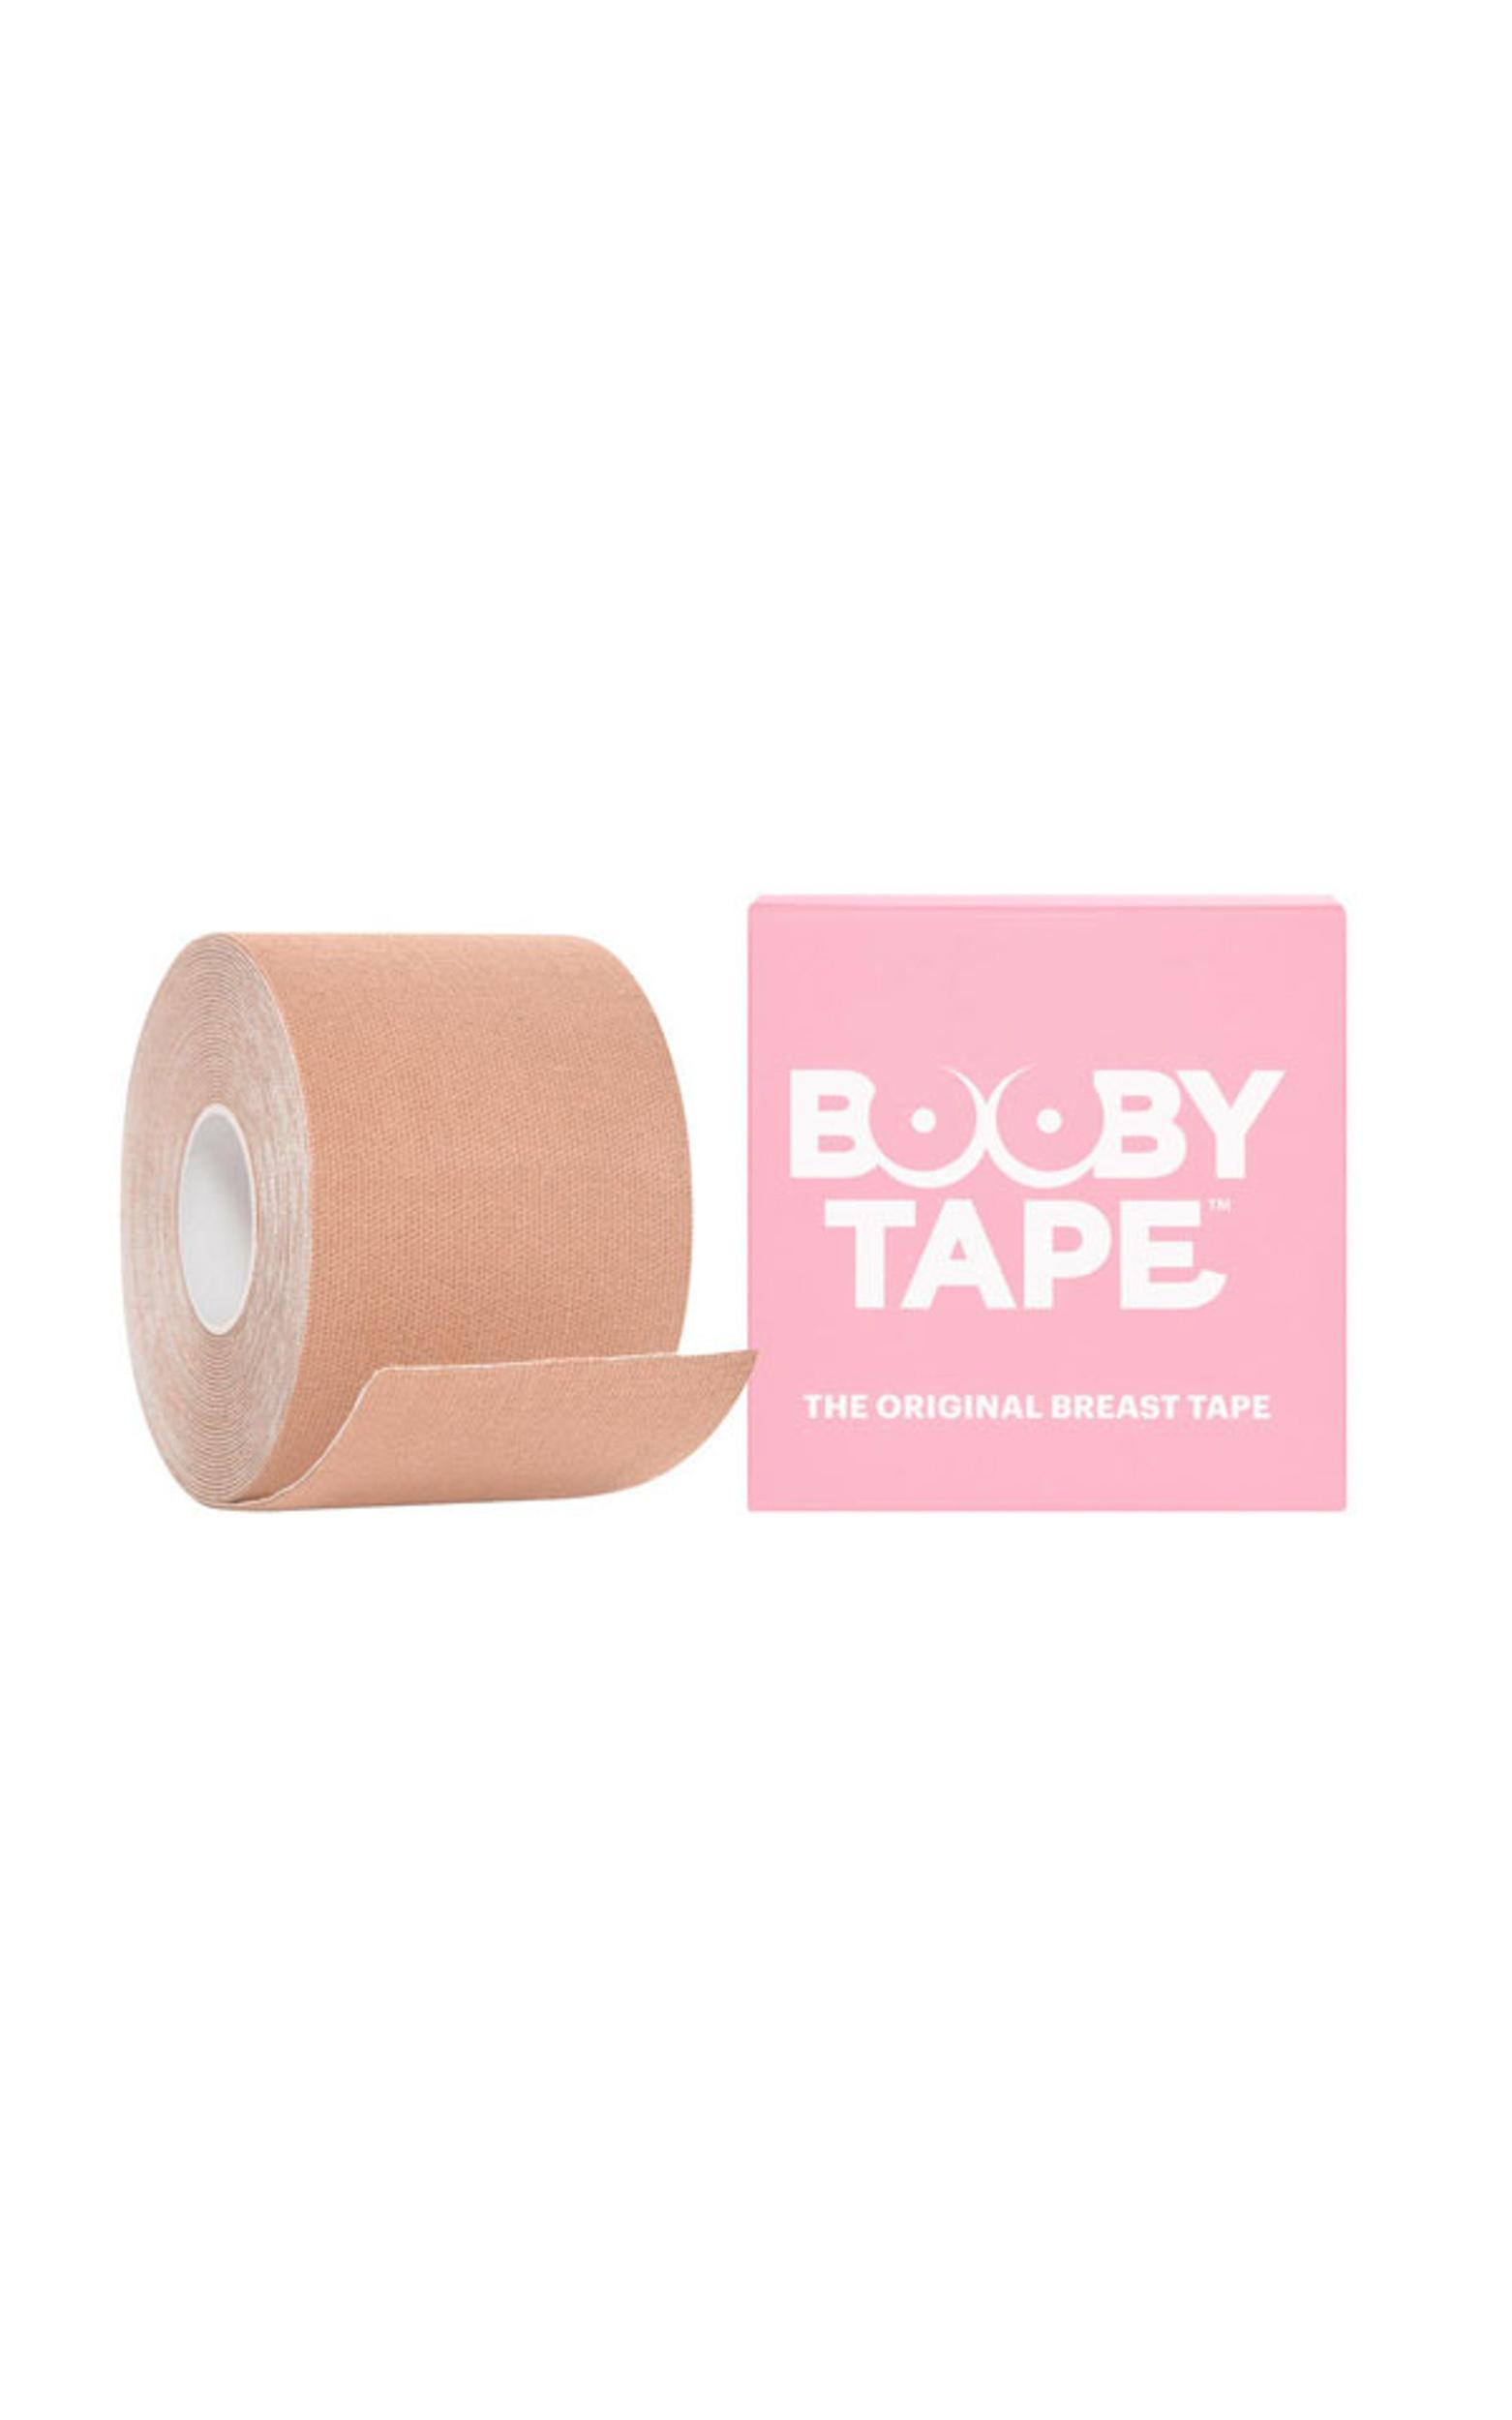 Booby Tape in Nude, BRN1, hi-res image number null